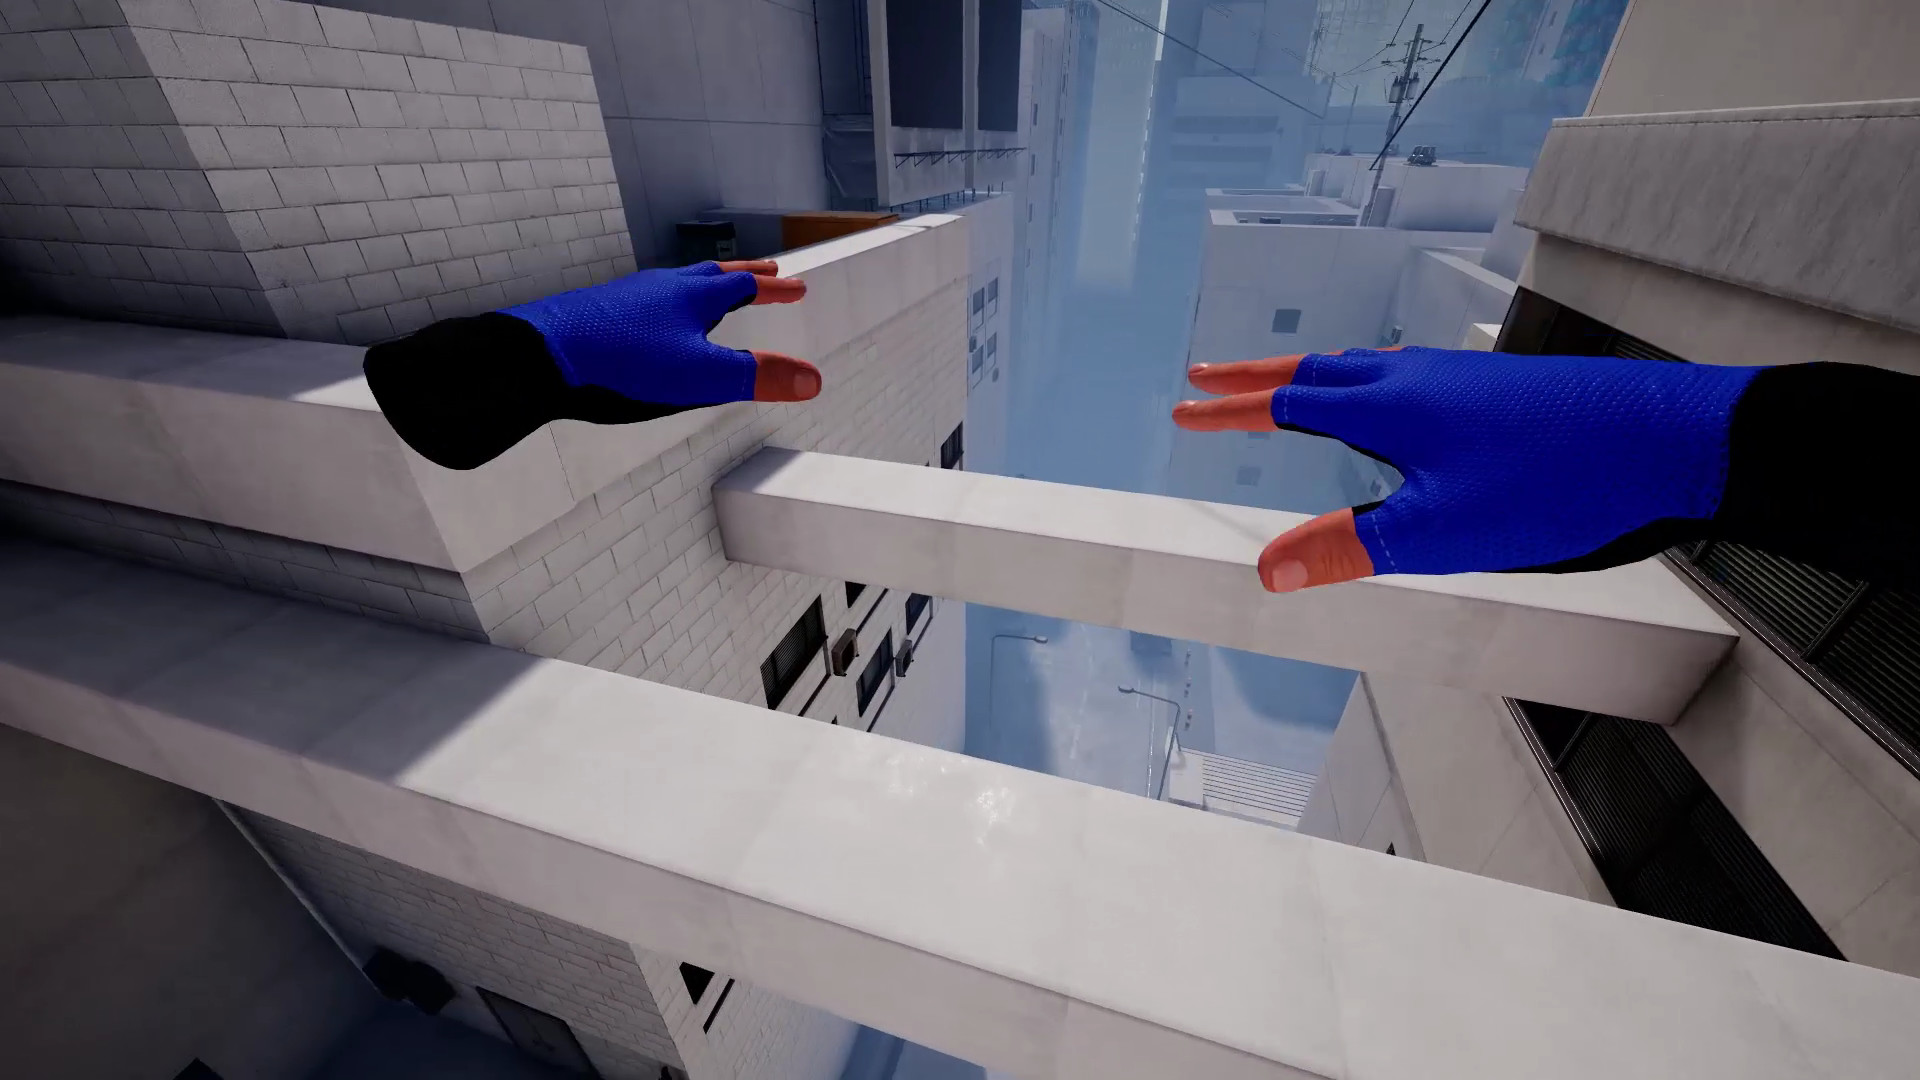 More Parkour game progress! 🎮 New tricks, better first person camera, mirrors edge